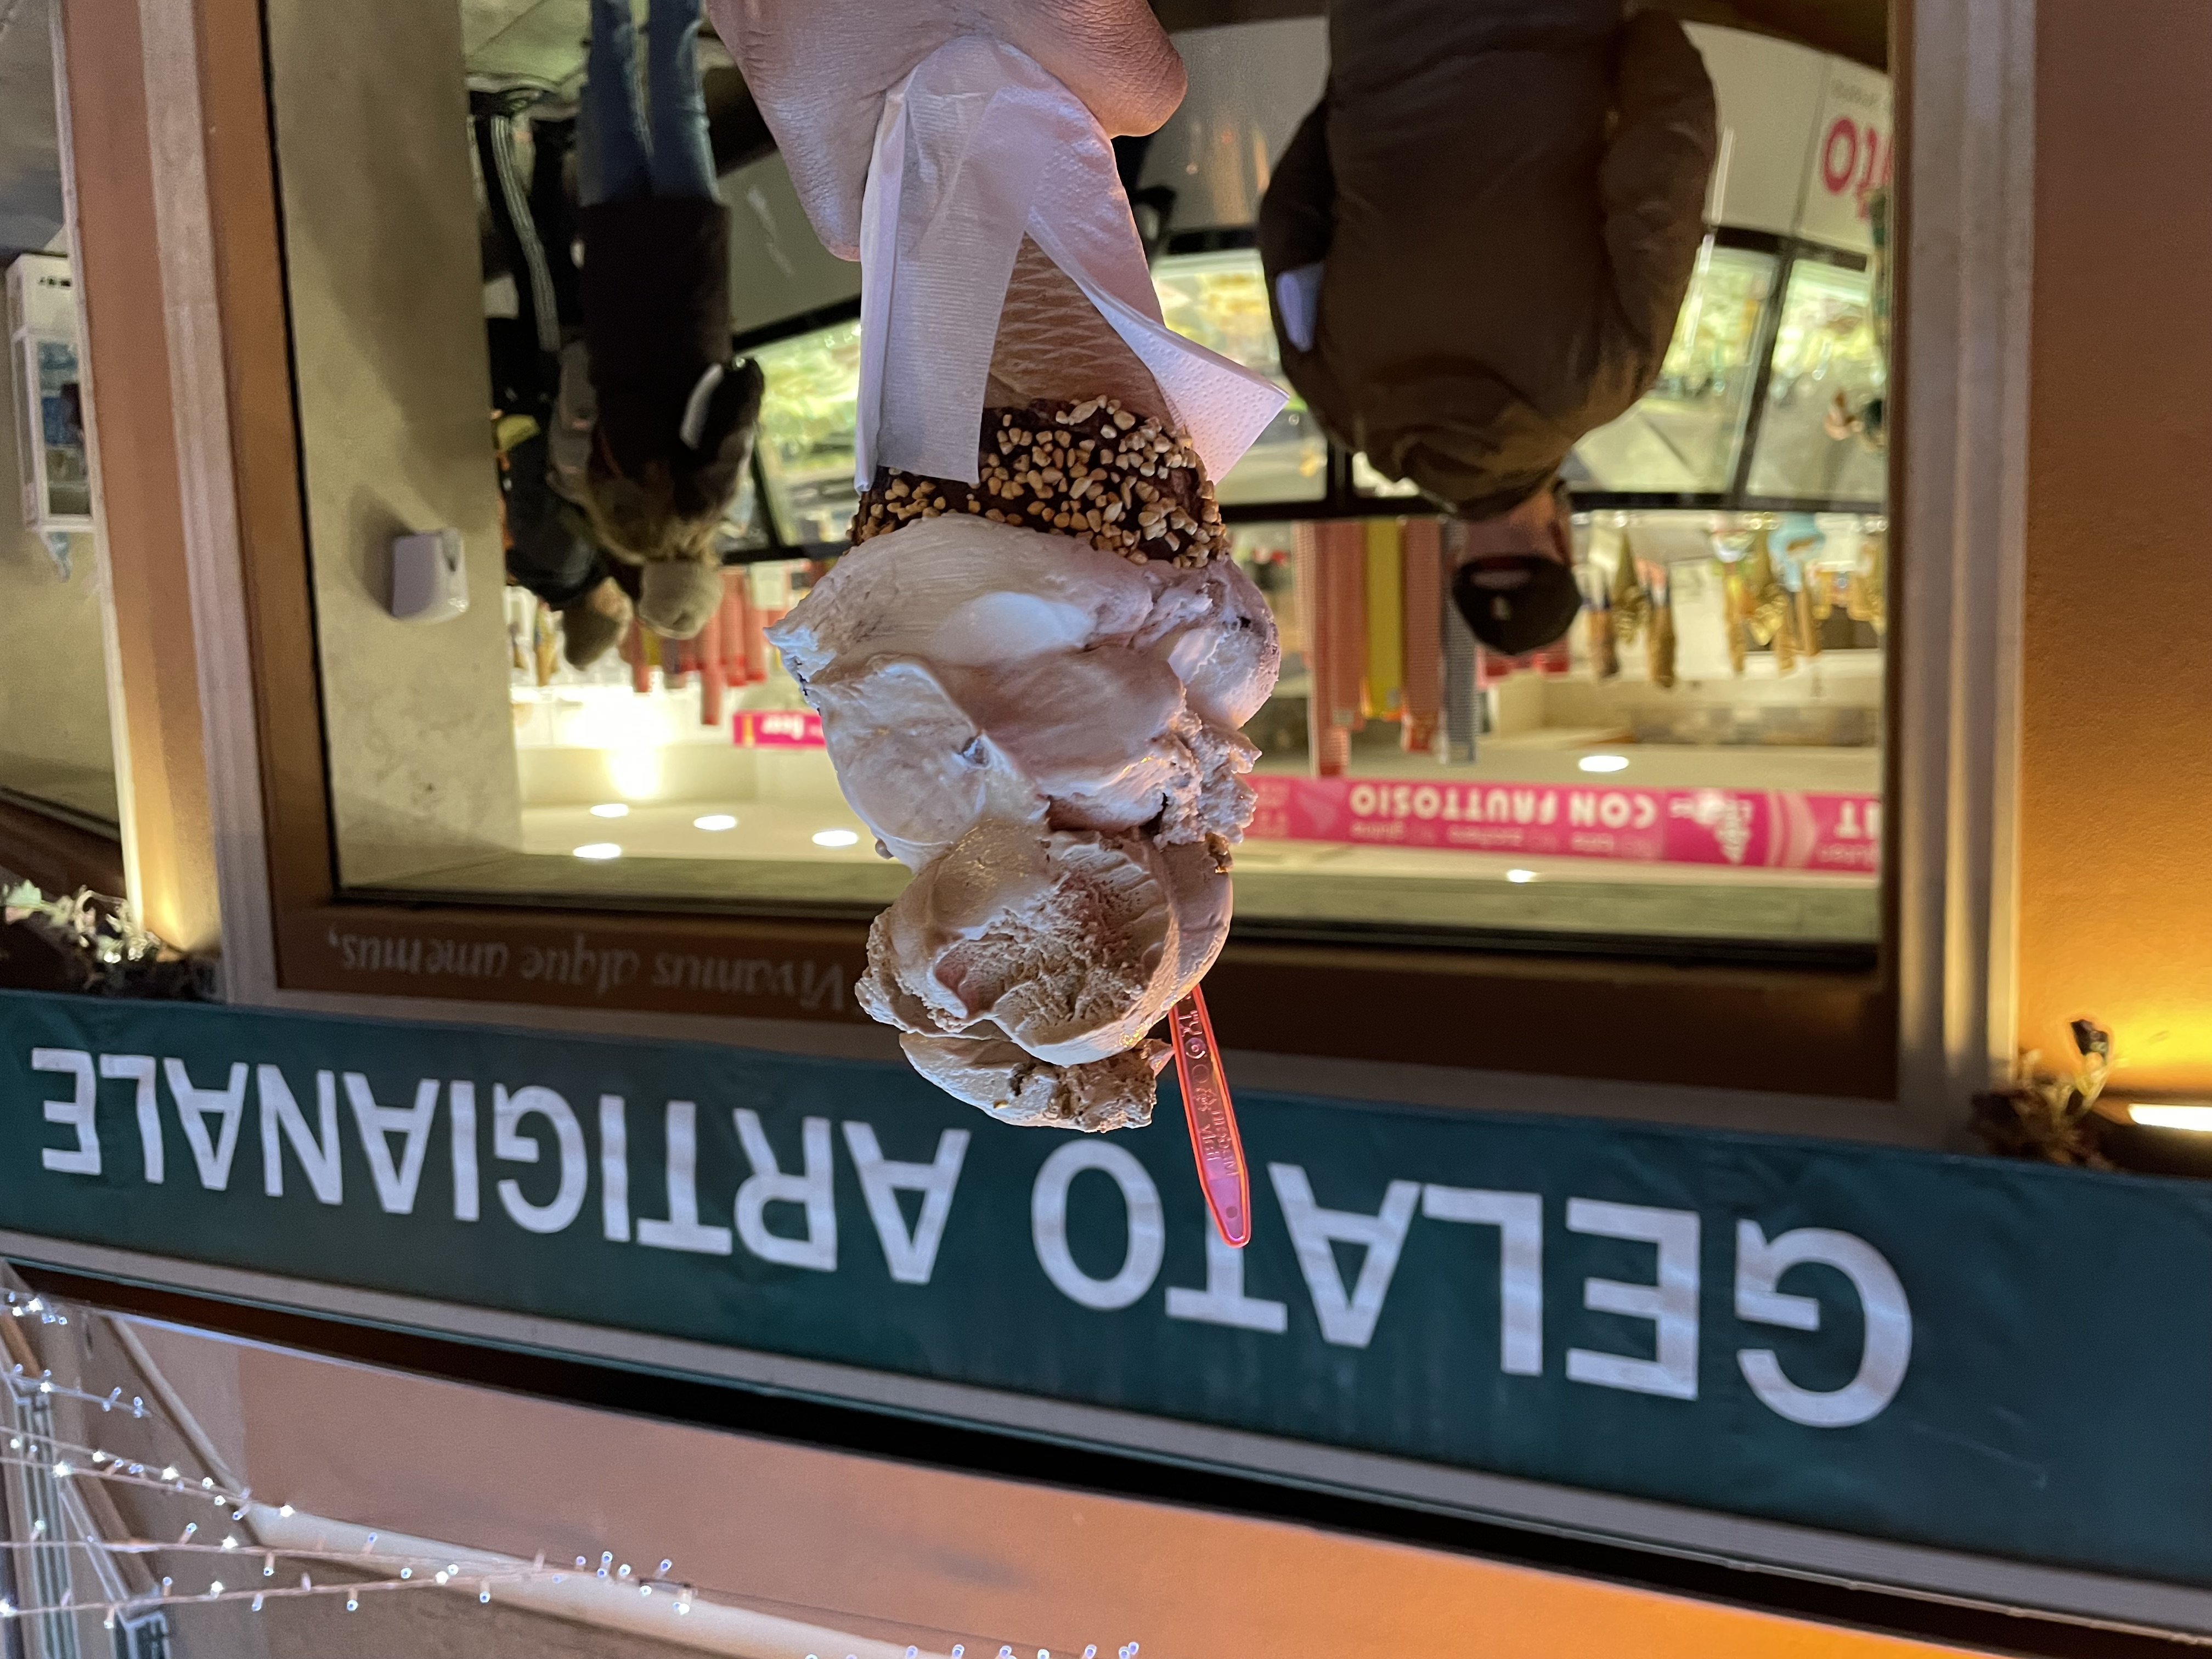 An image of a double-decker ice cream cone with a bite taken out. The sign in the background reads "Gelato Artigianale"